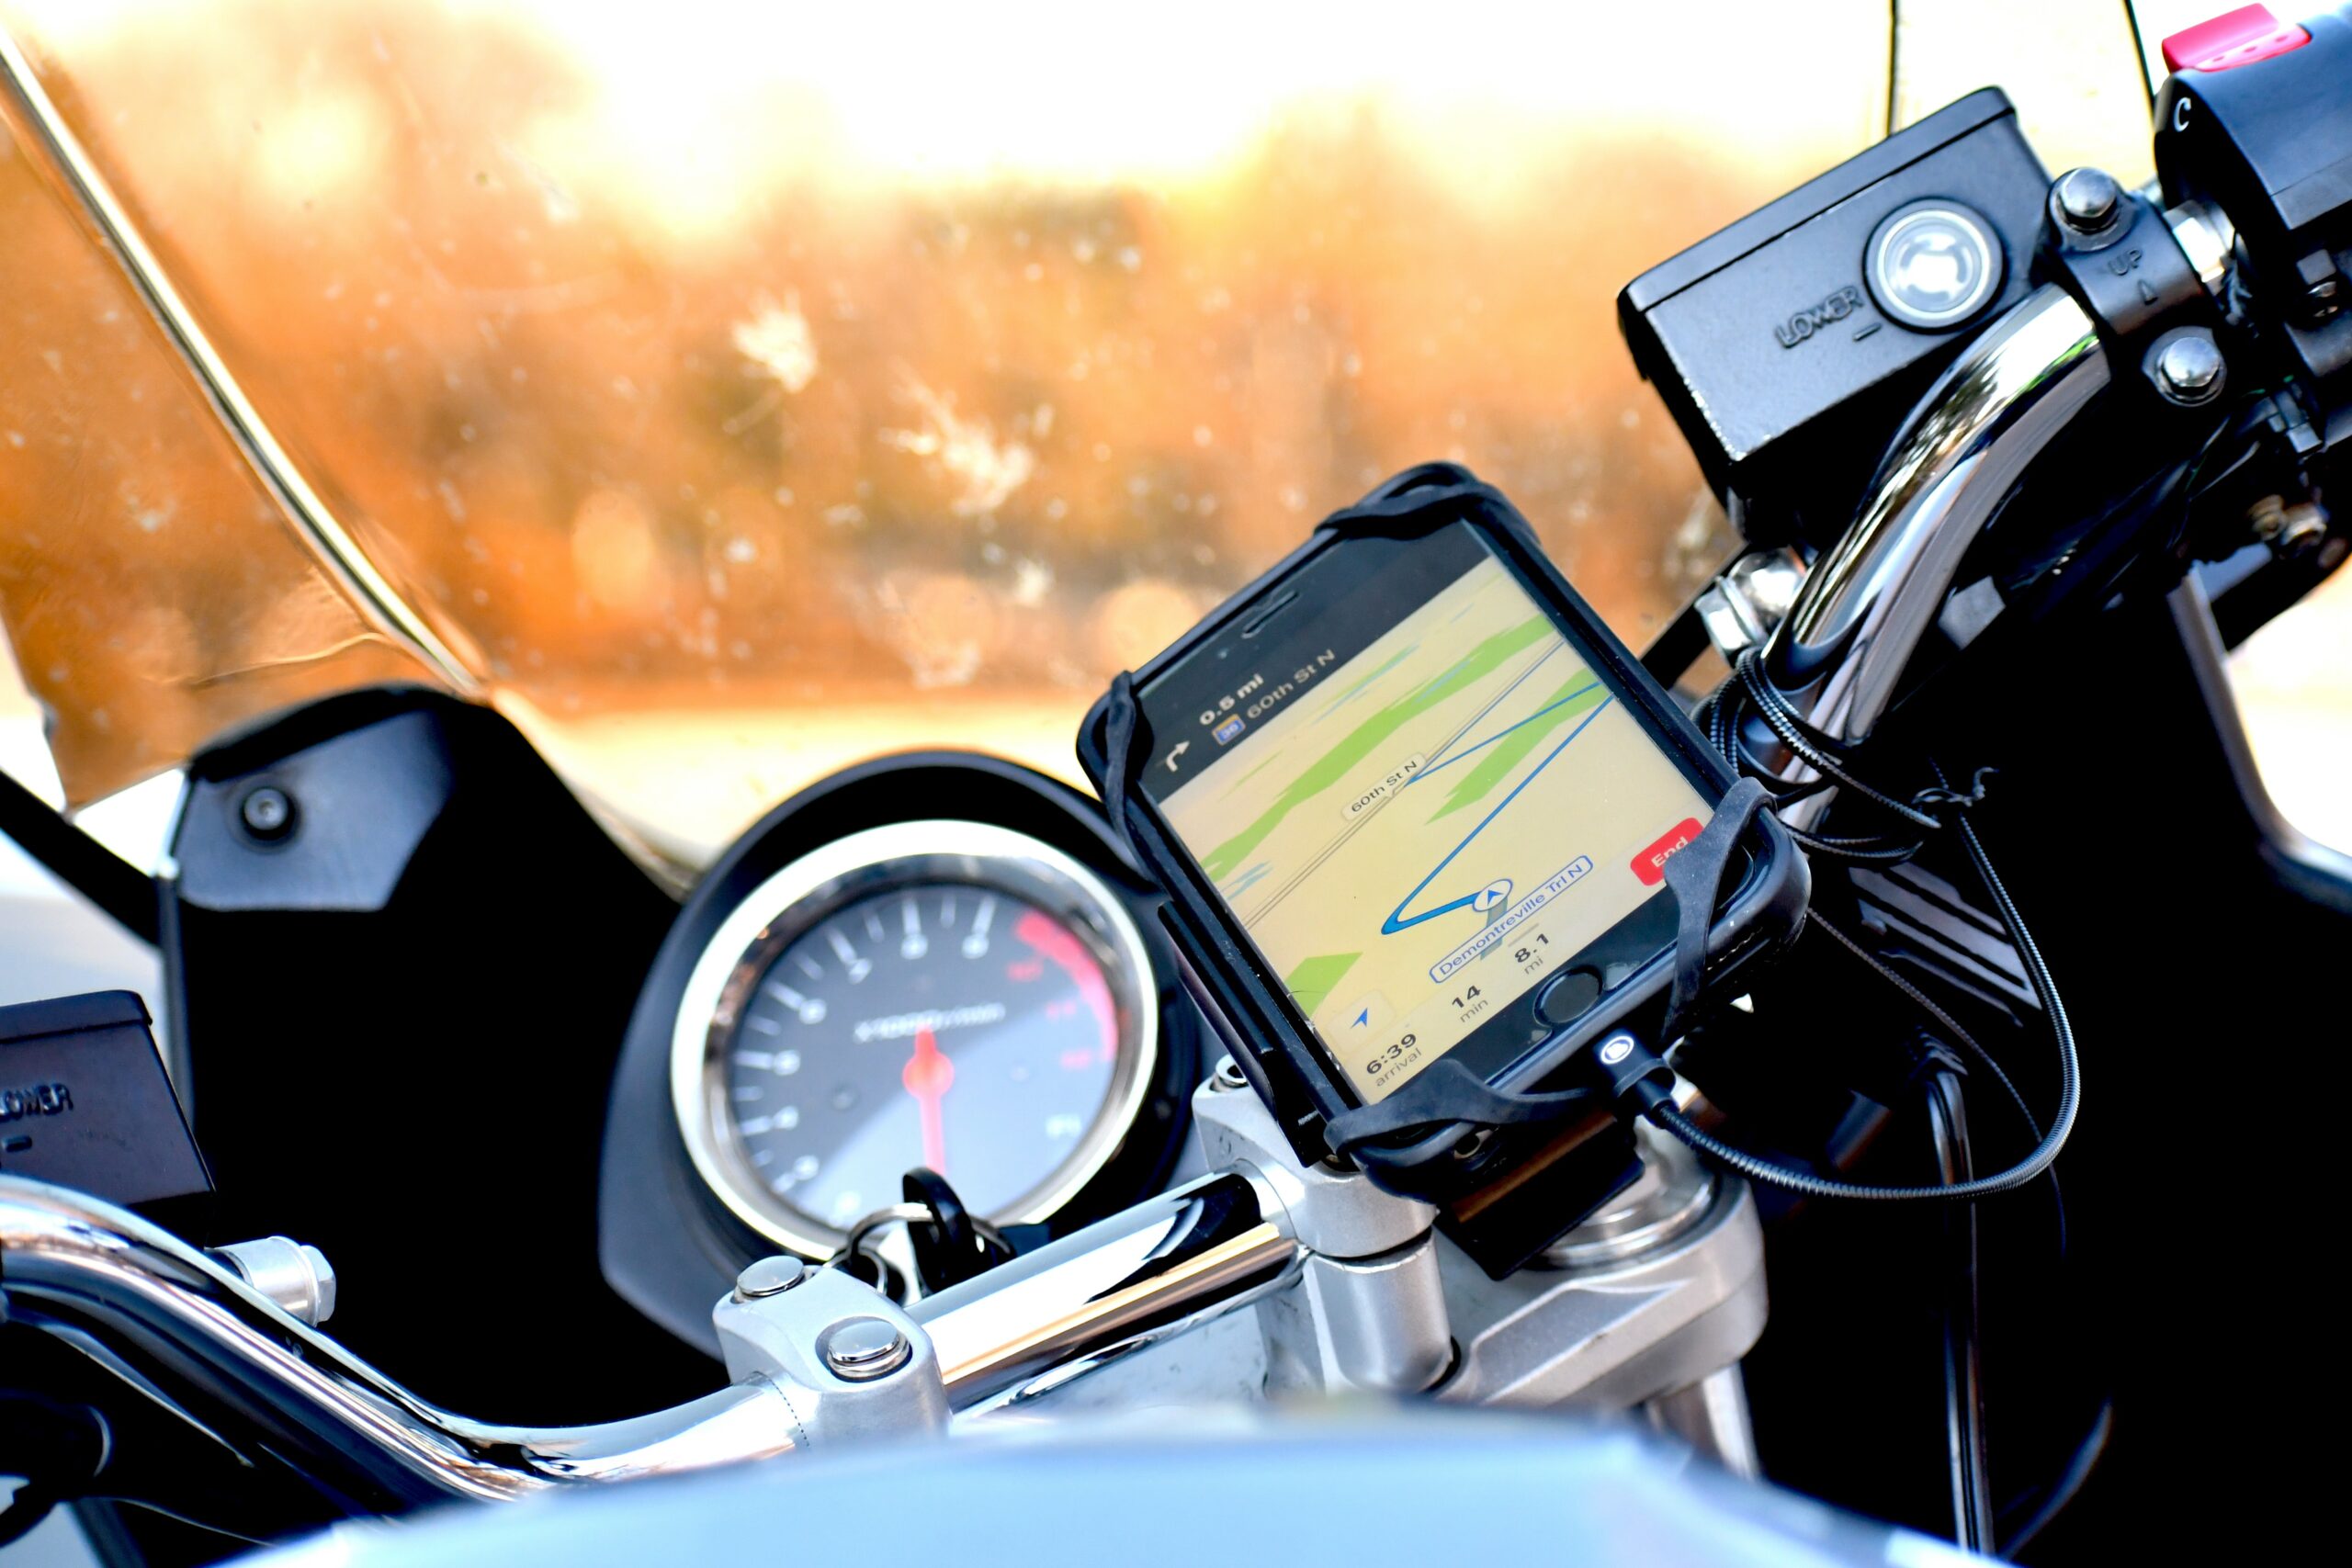 motorcycle navigation system gift idea